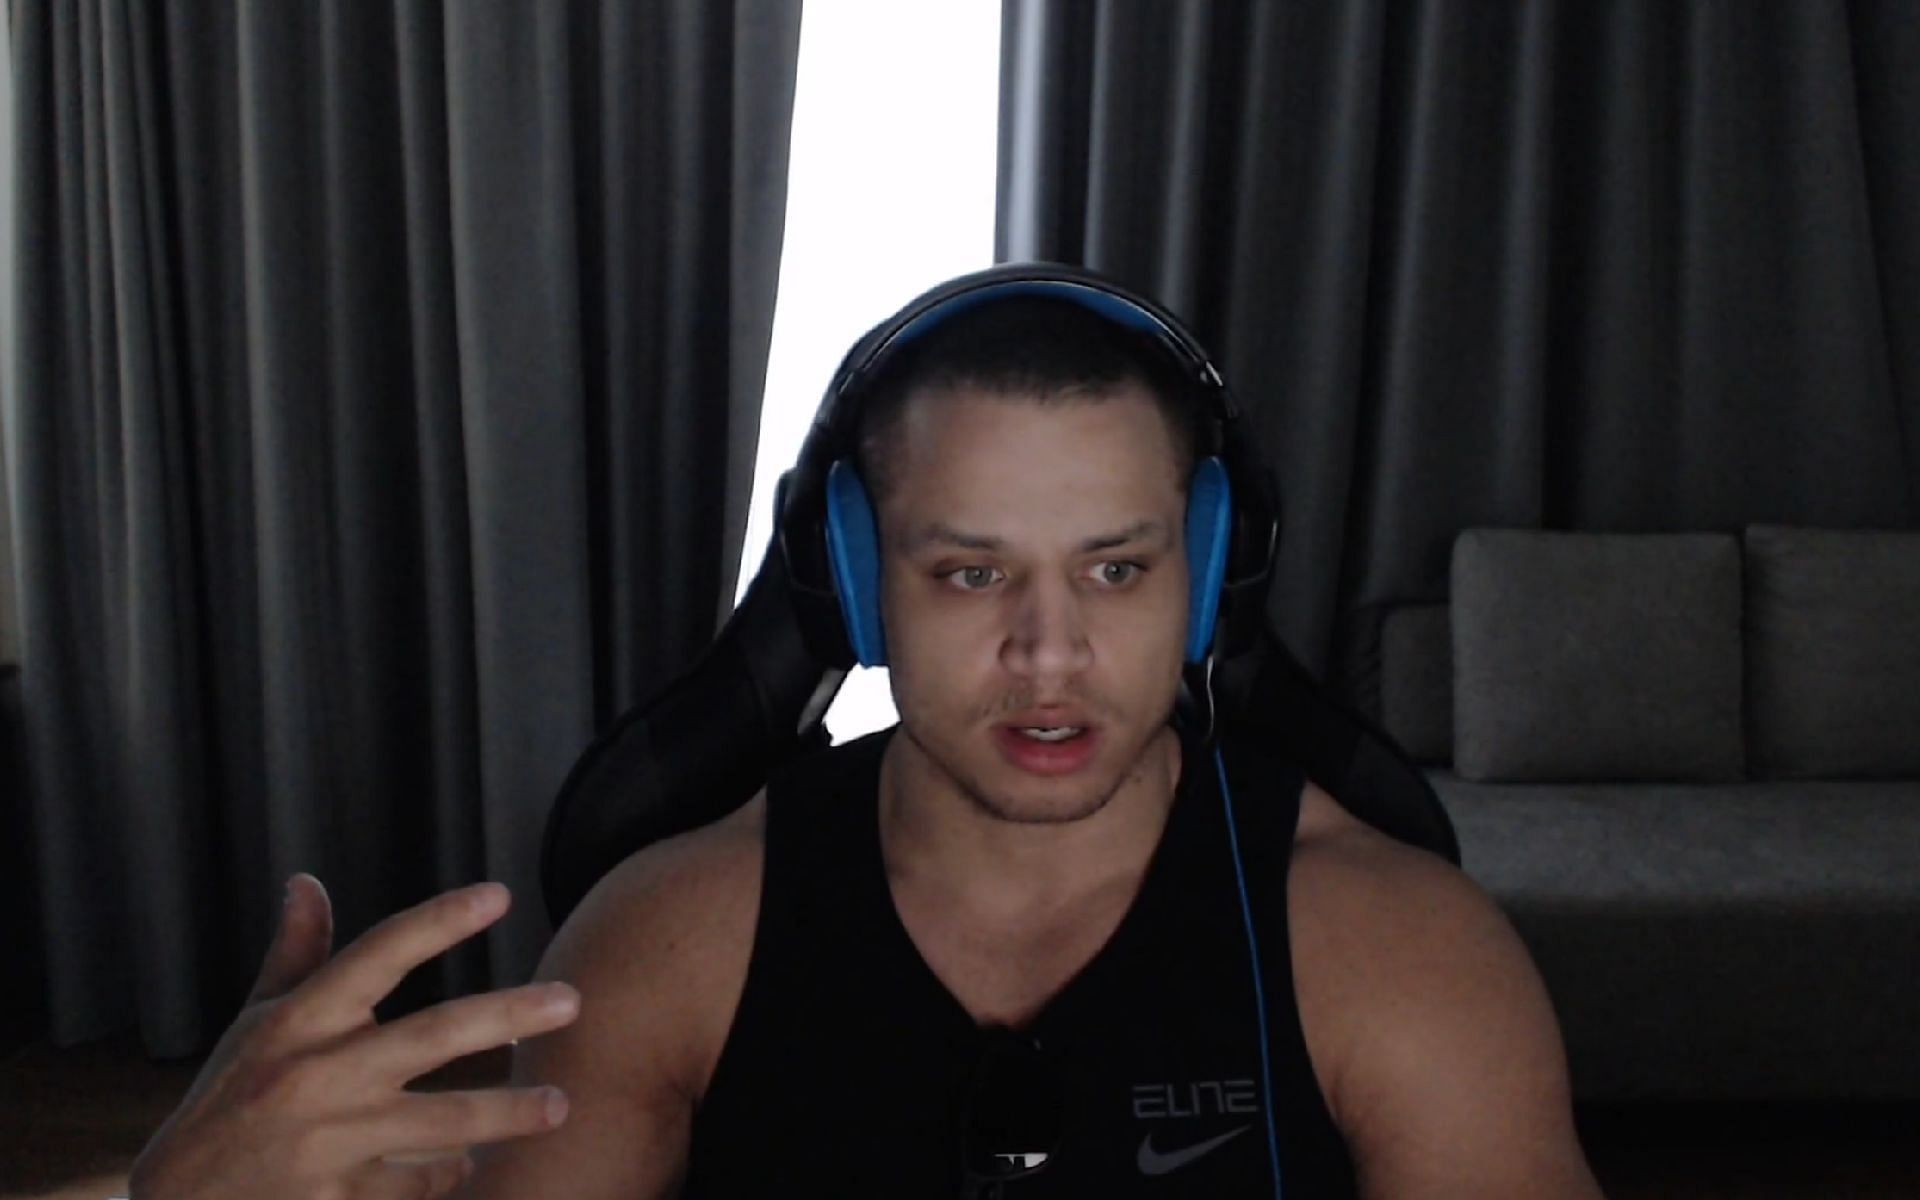 Tyler1 accidentally yelled at hotel staff during a stream (Image via loltyler1/Twitch)